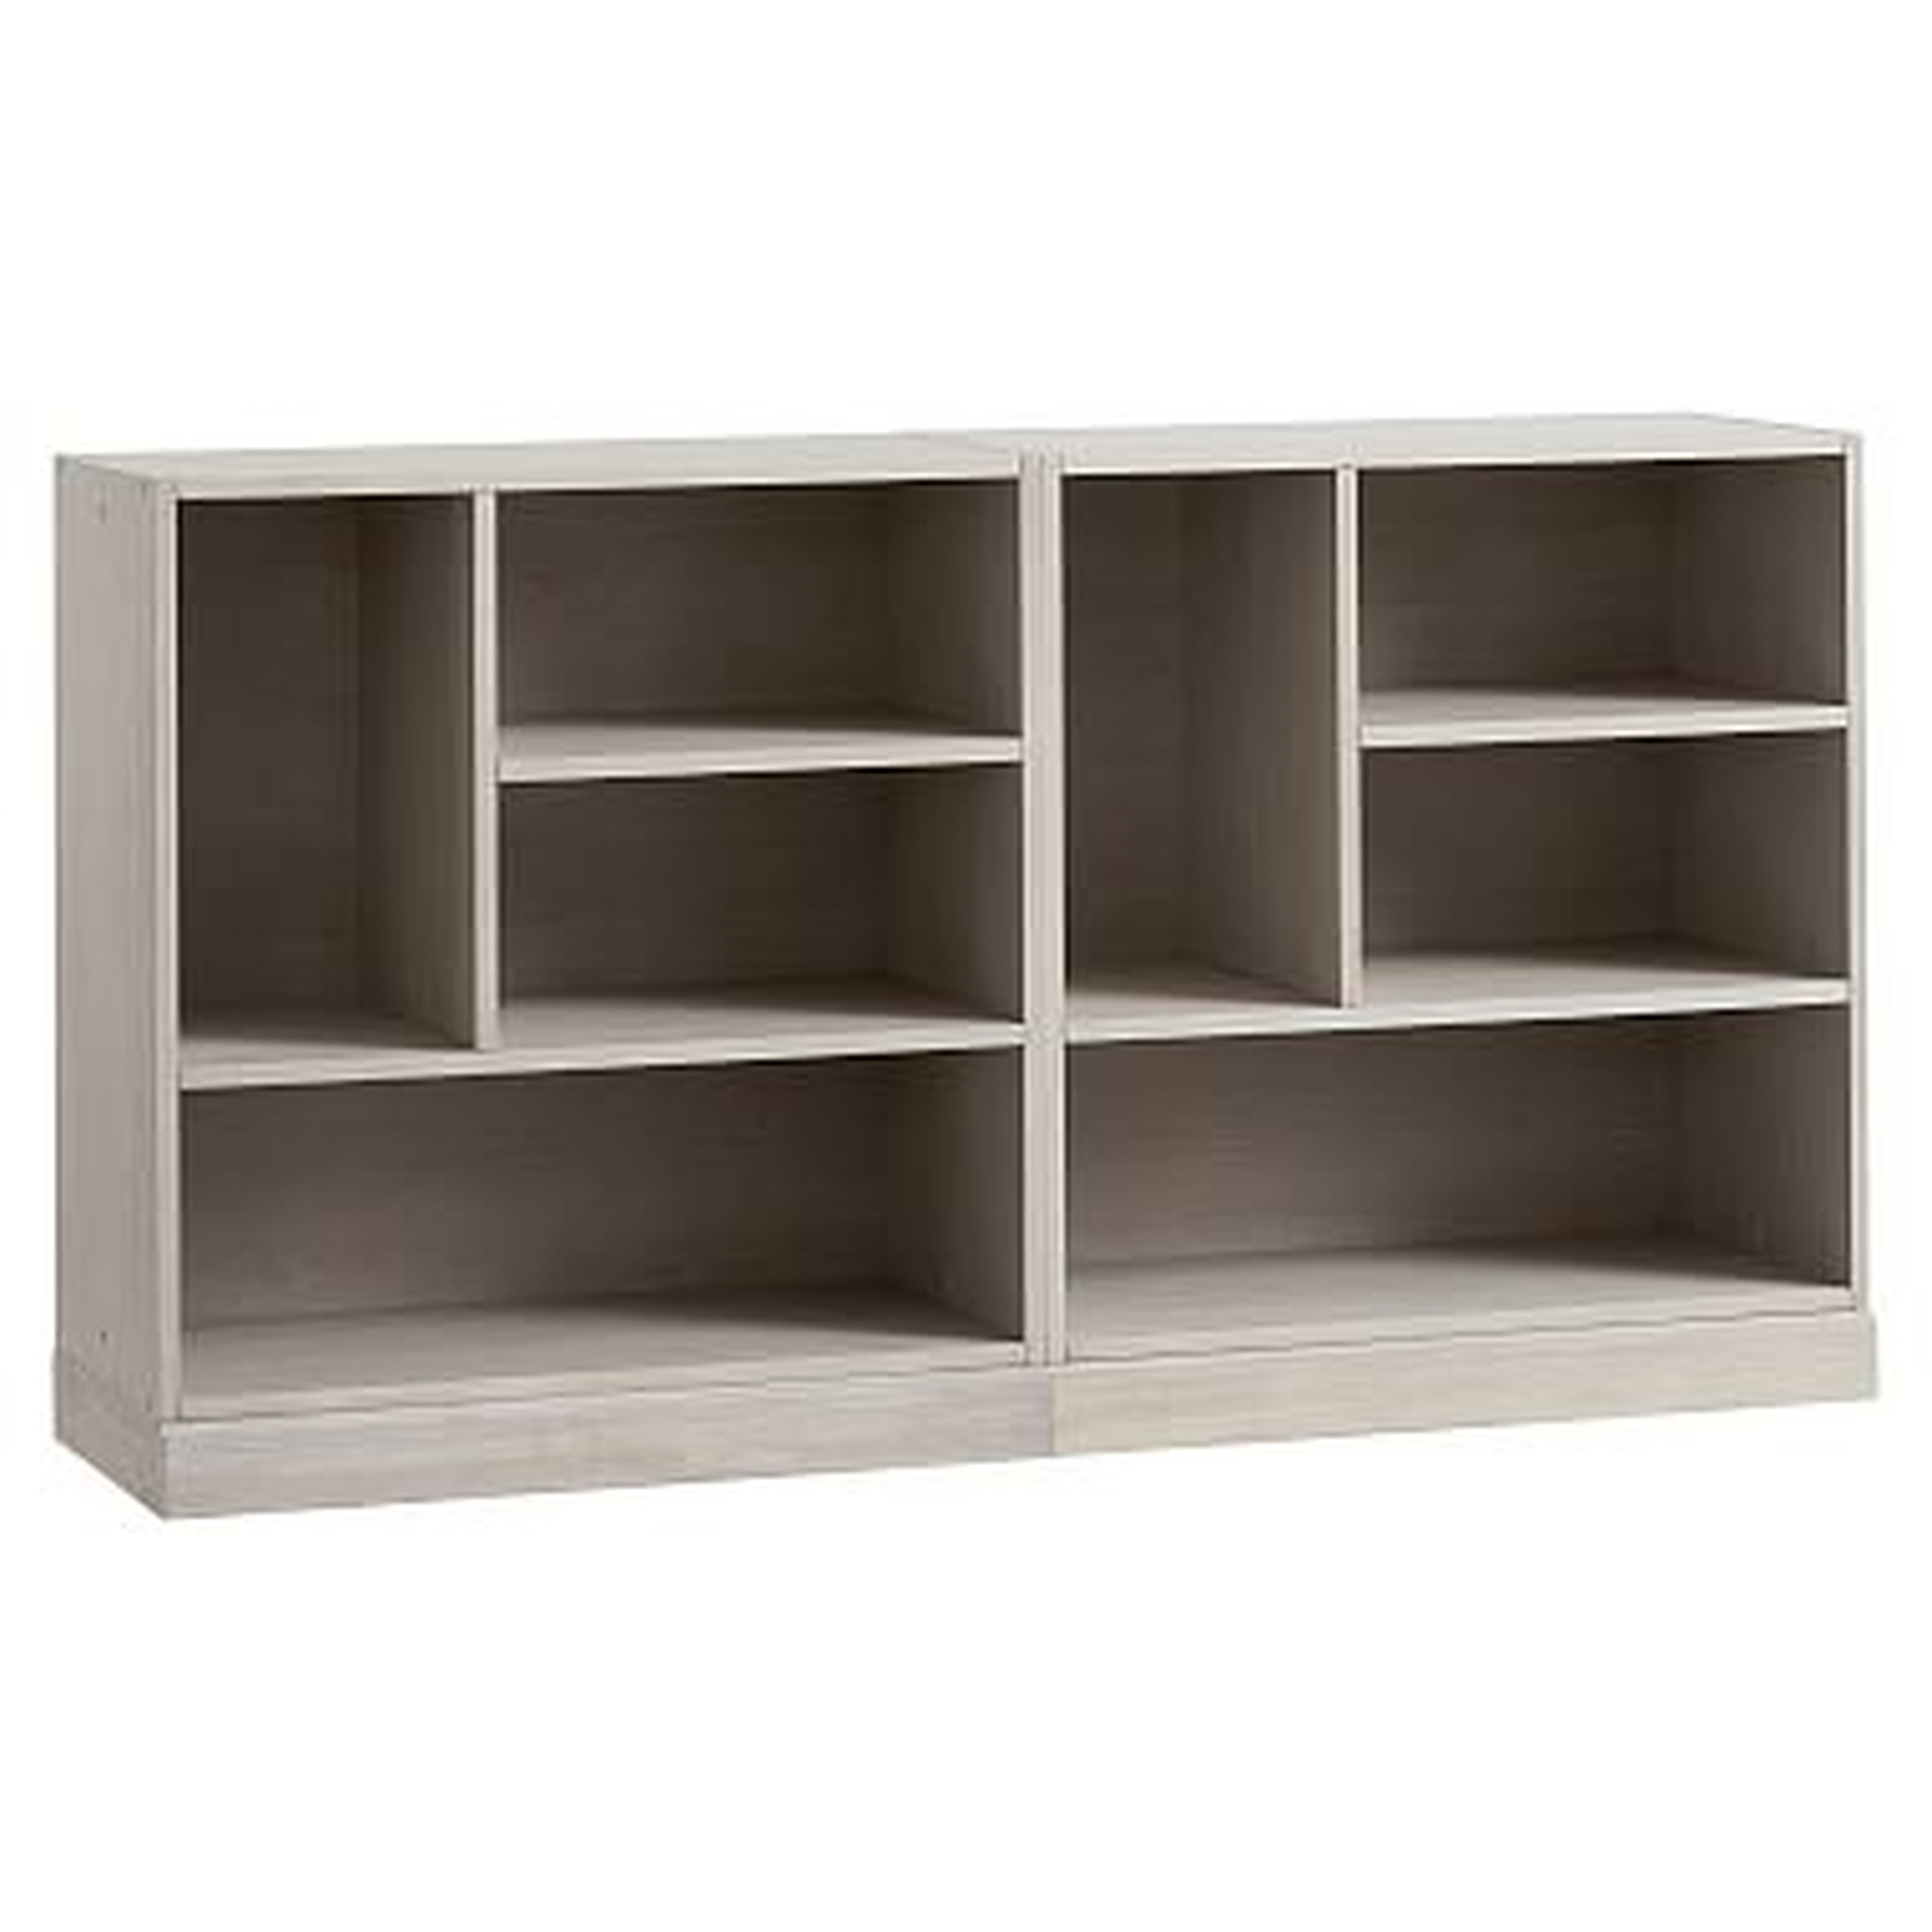 Stack Me Up Double Mixed Shelf Bookcase, Brushed Fog - Pottery Barn Teen